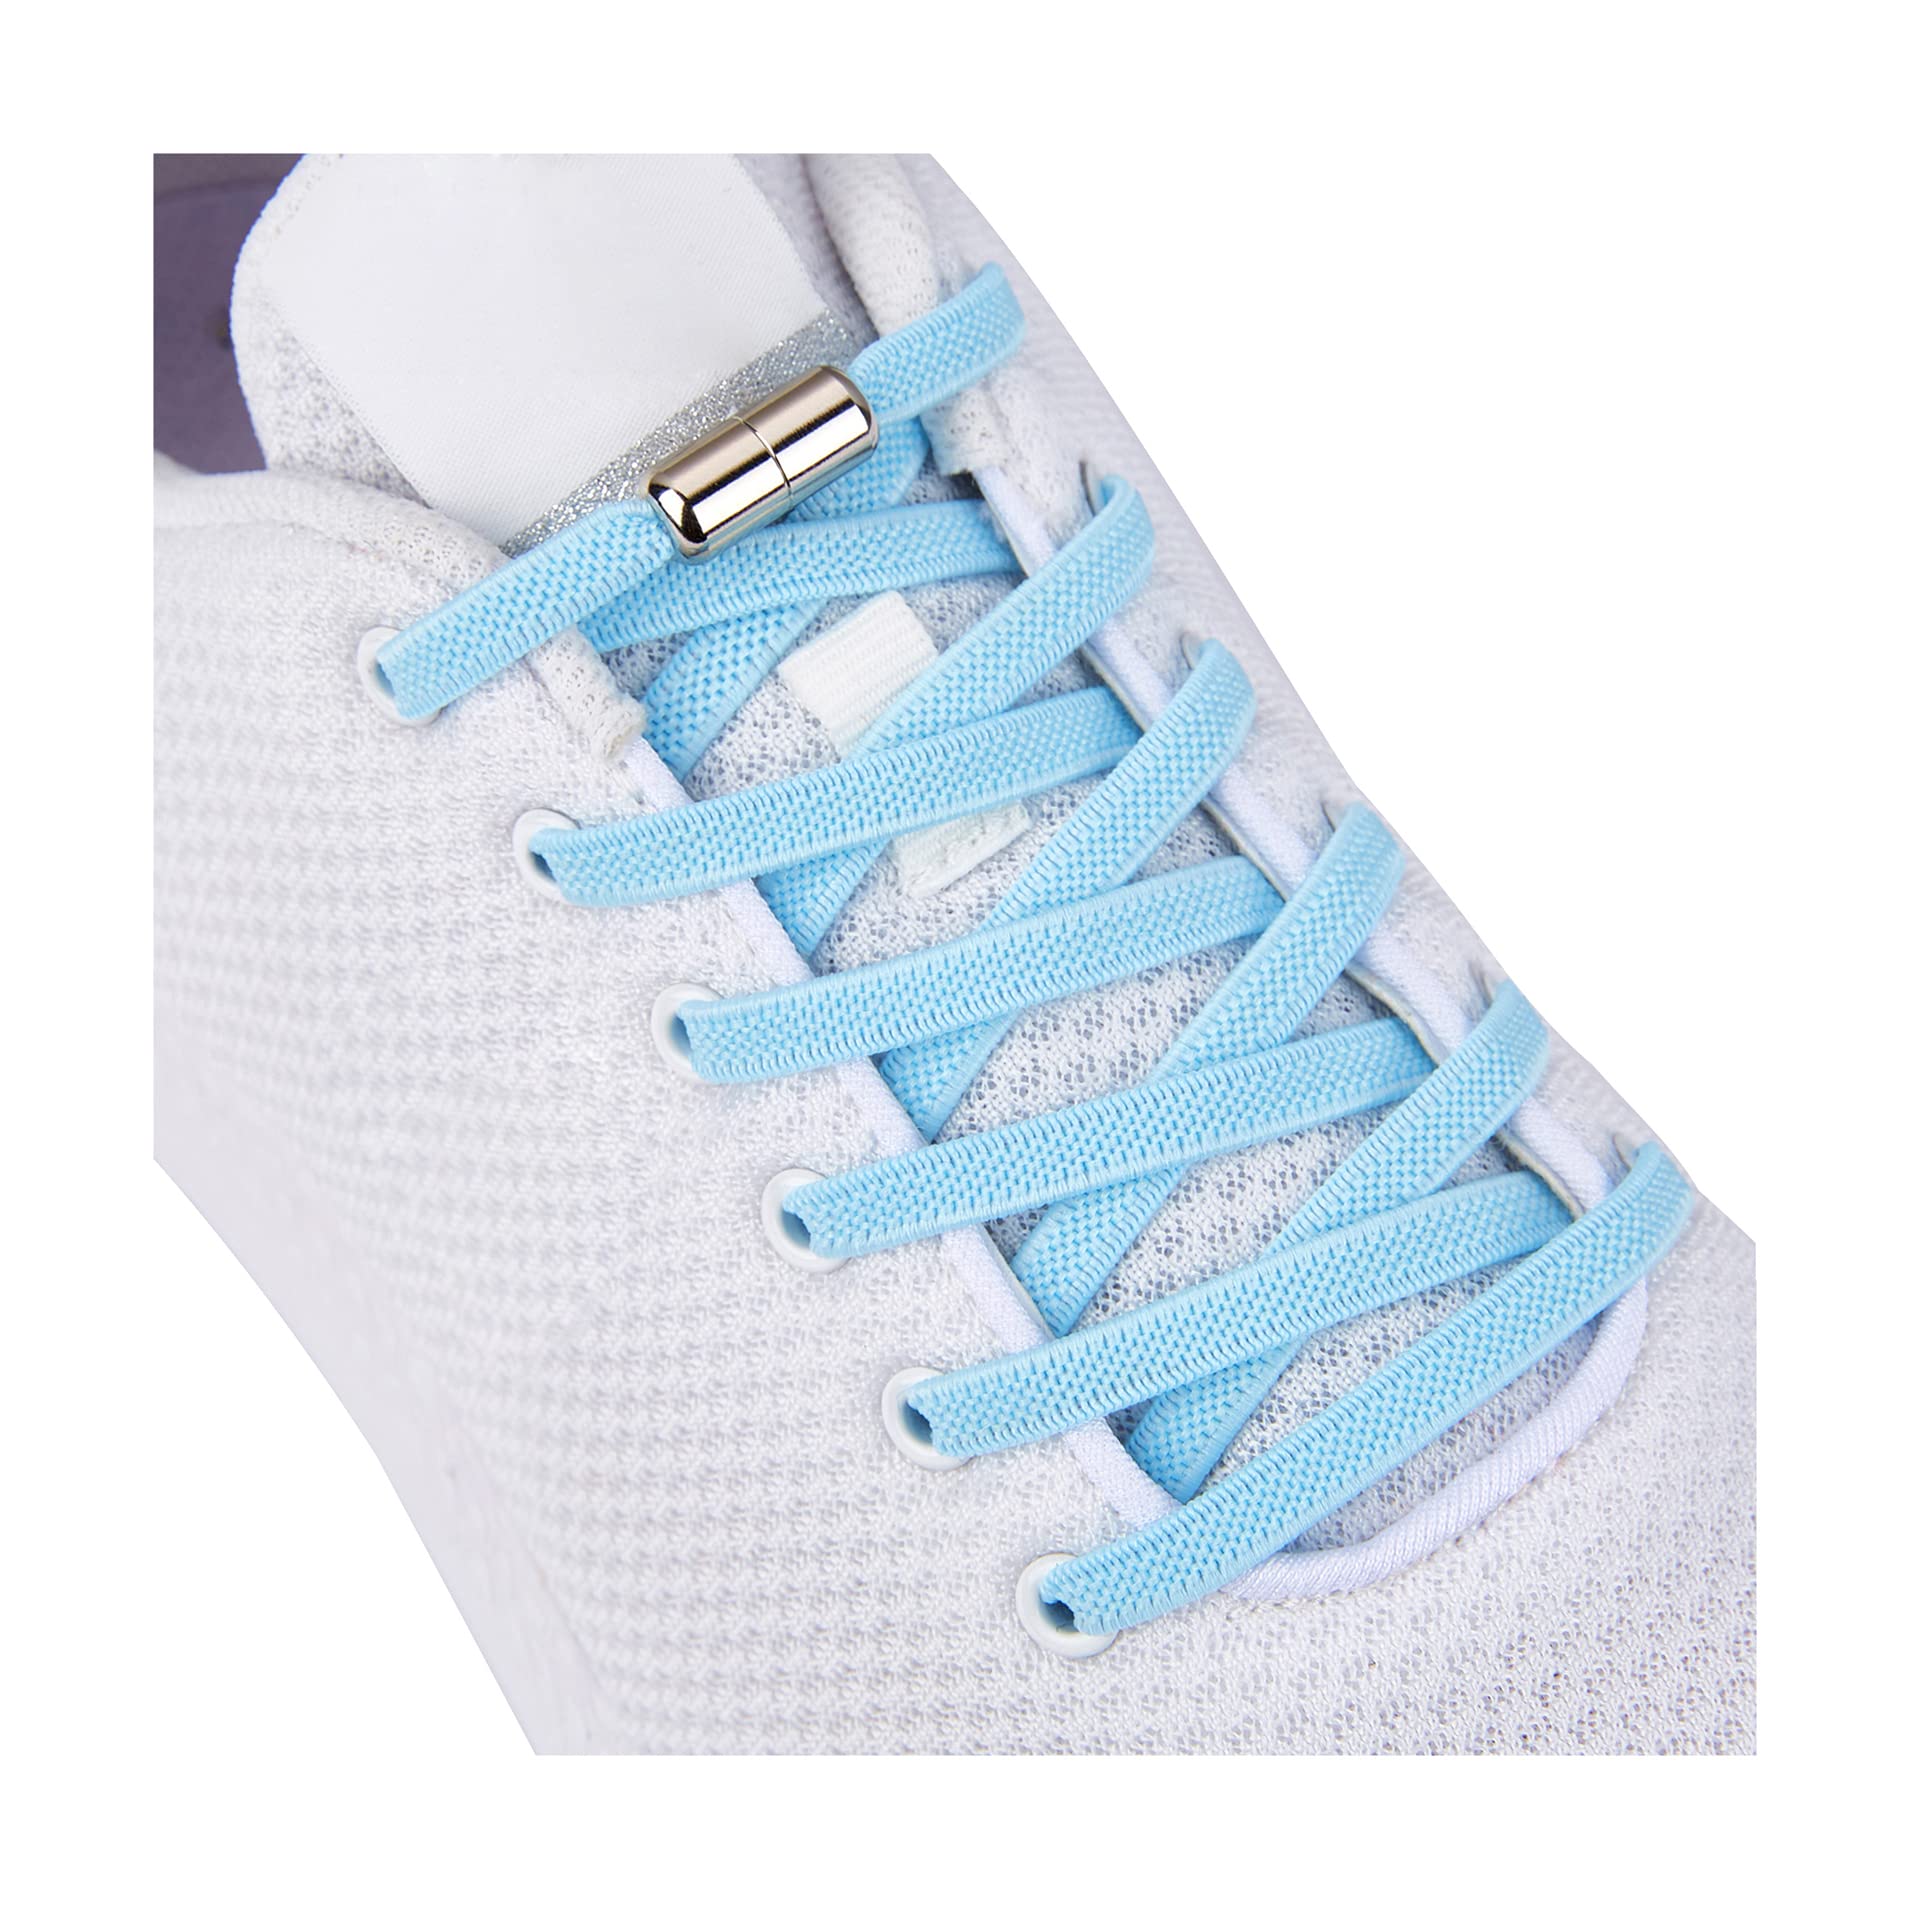 anan520 Tieless Elastic Shoe Laces, No Tie Shoelaces for KidsAdults Baby Blue